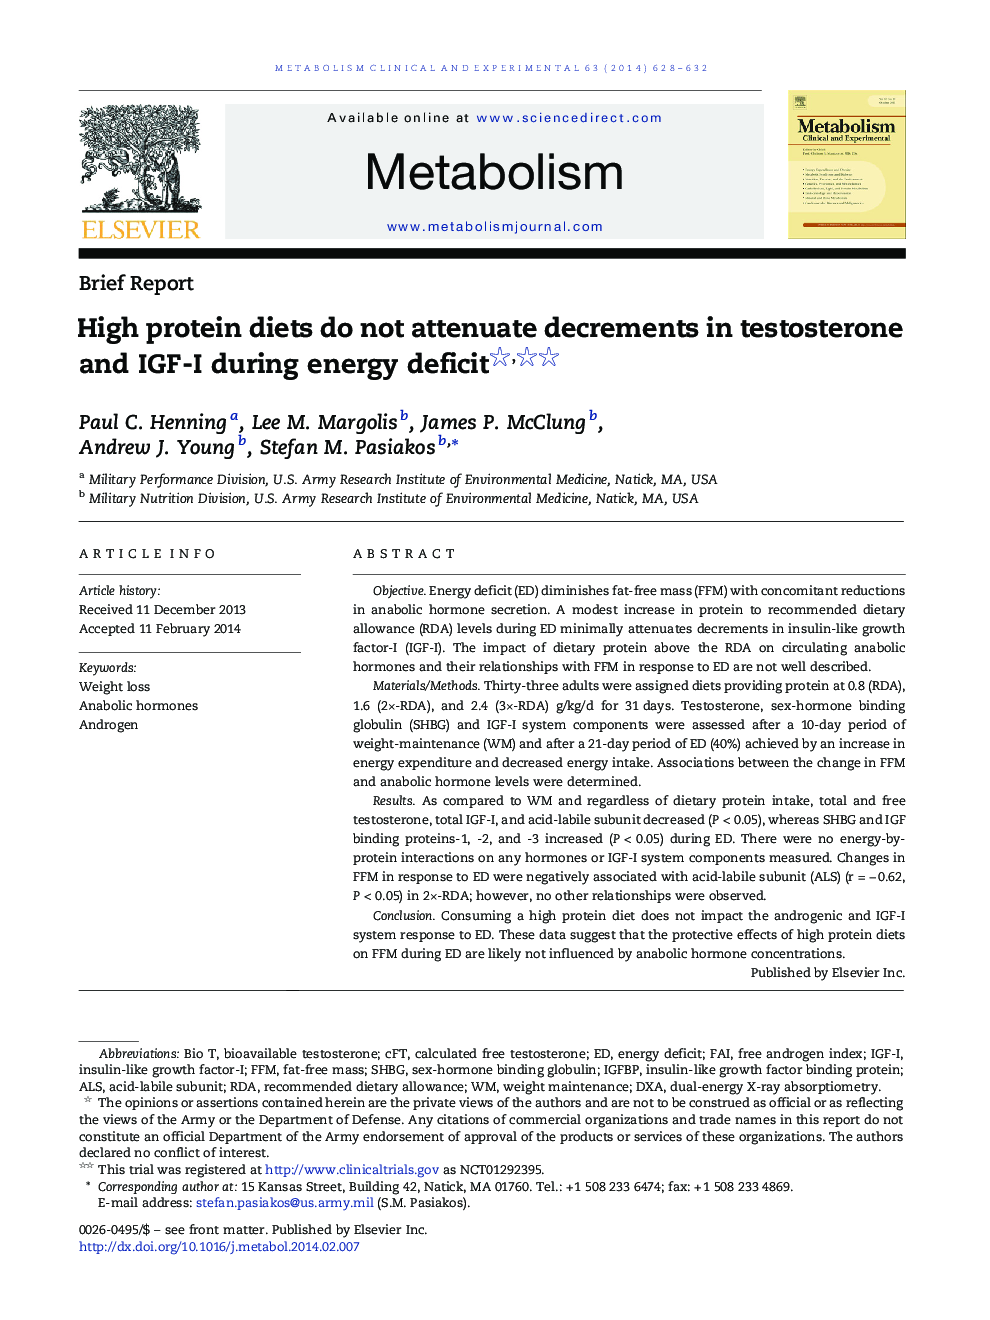 High protein diets do not attenuate decrements in testosterone and IGF-I during energy deficit 